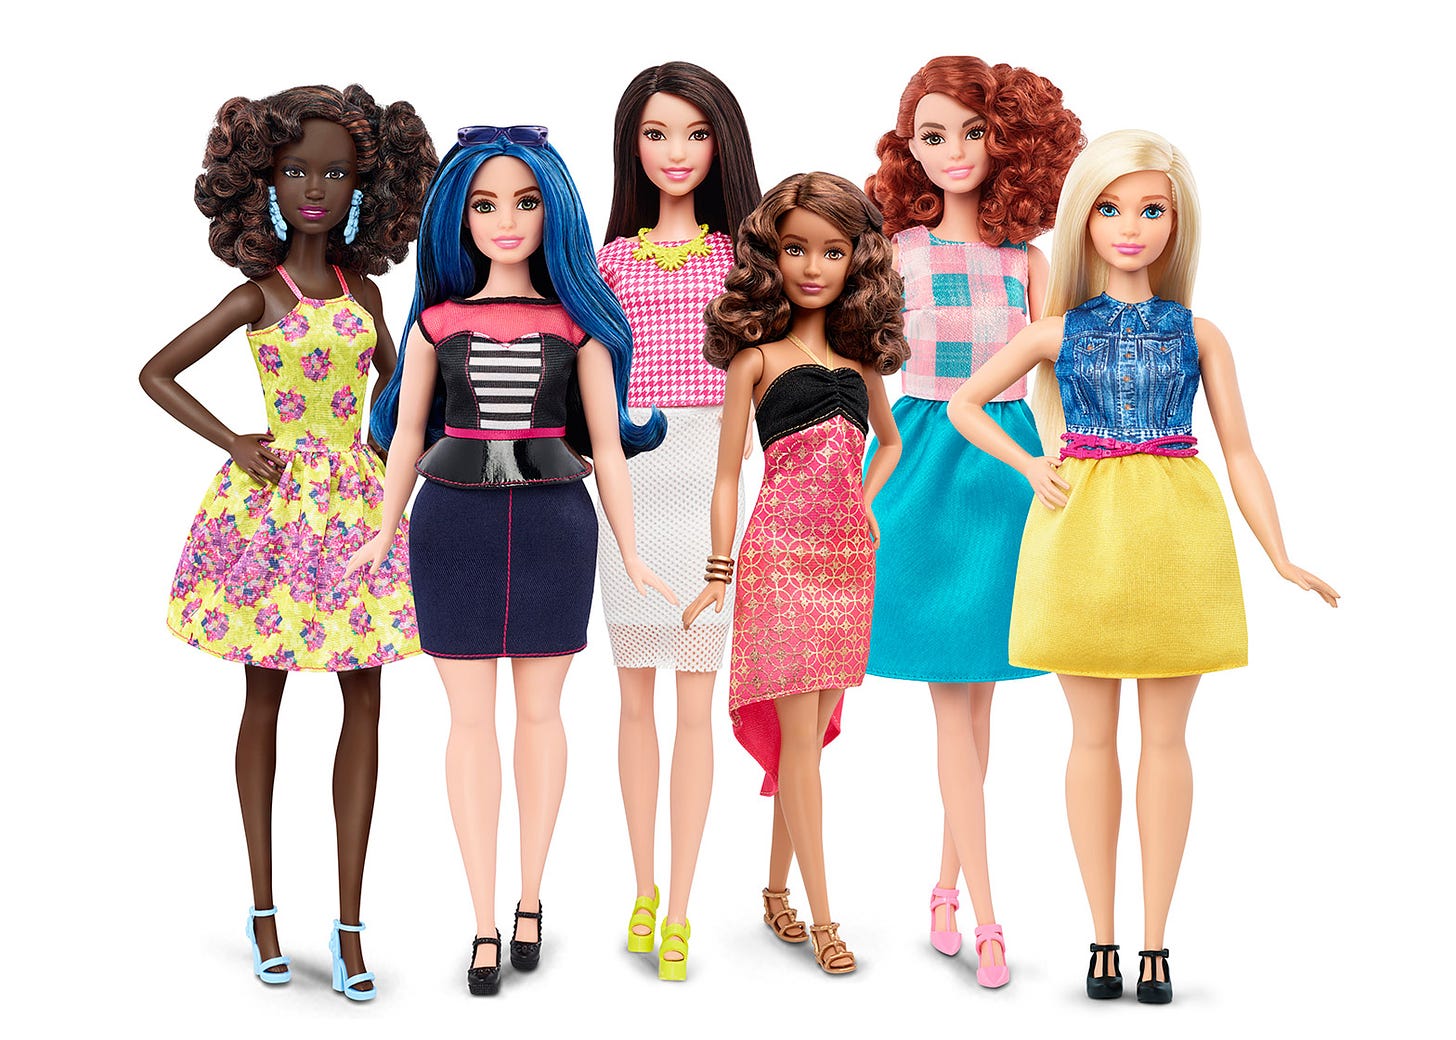 Barbie dolls now available in four body types